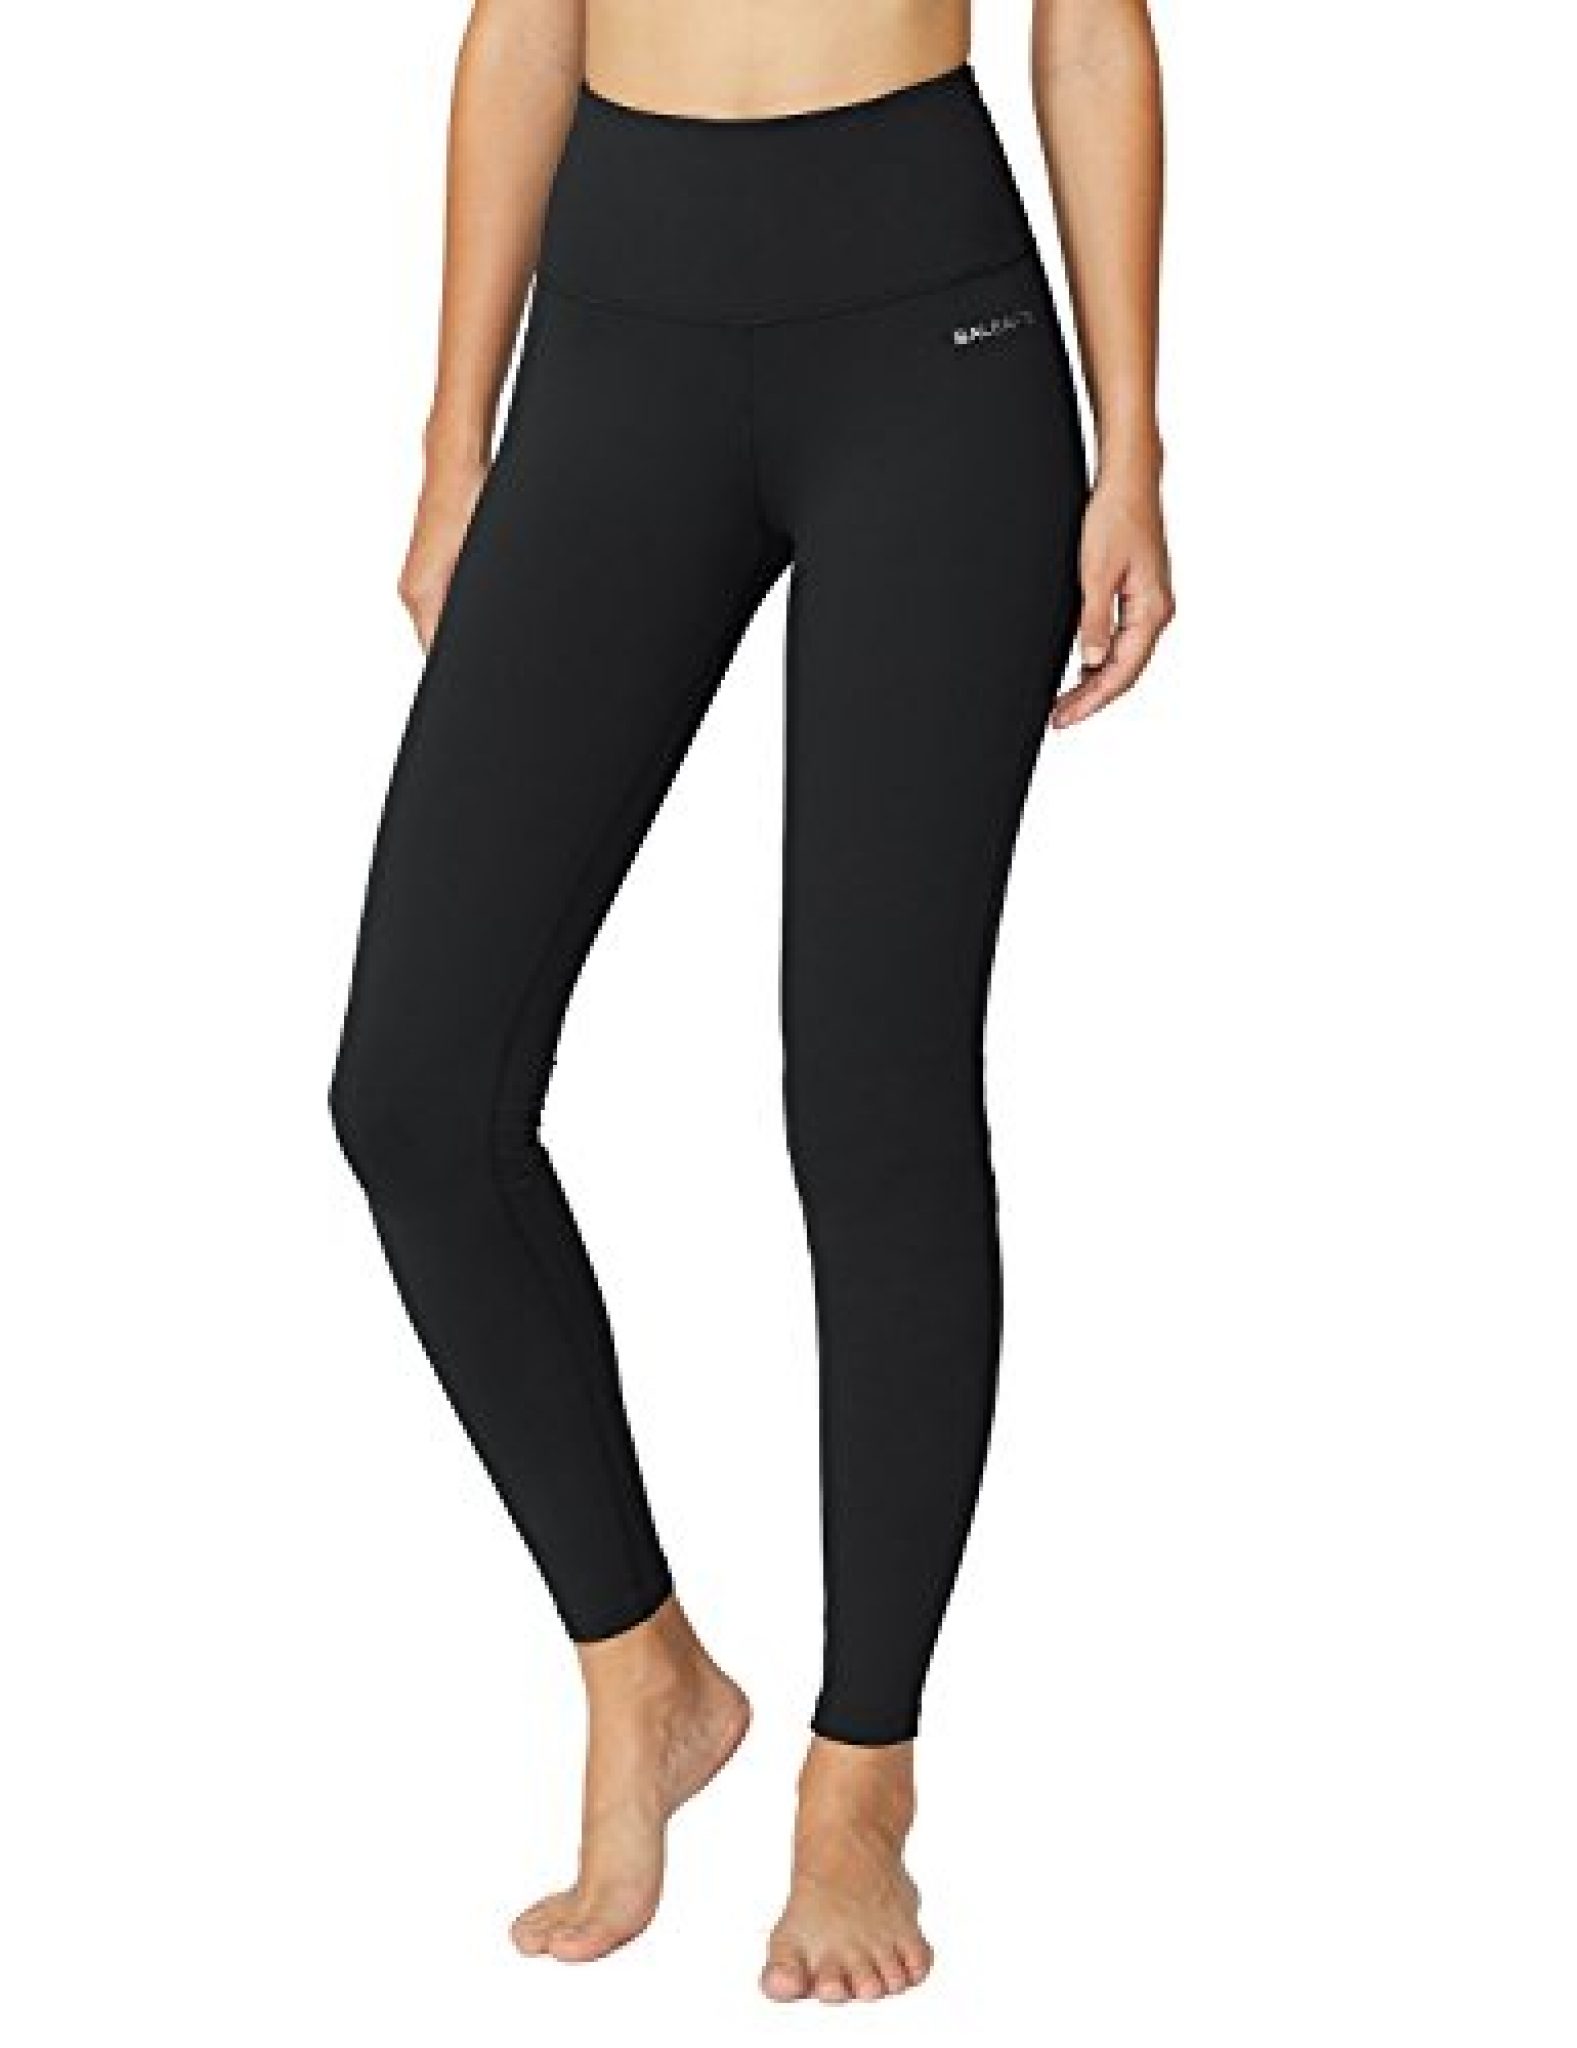 BALEAF Womens 7/8 Running Tights with Zipper Pocket Hiking Legging for  Workout